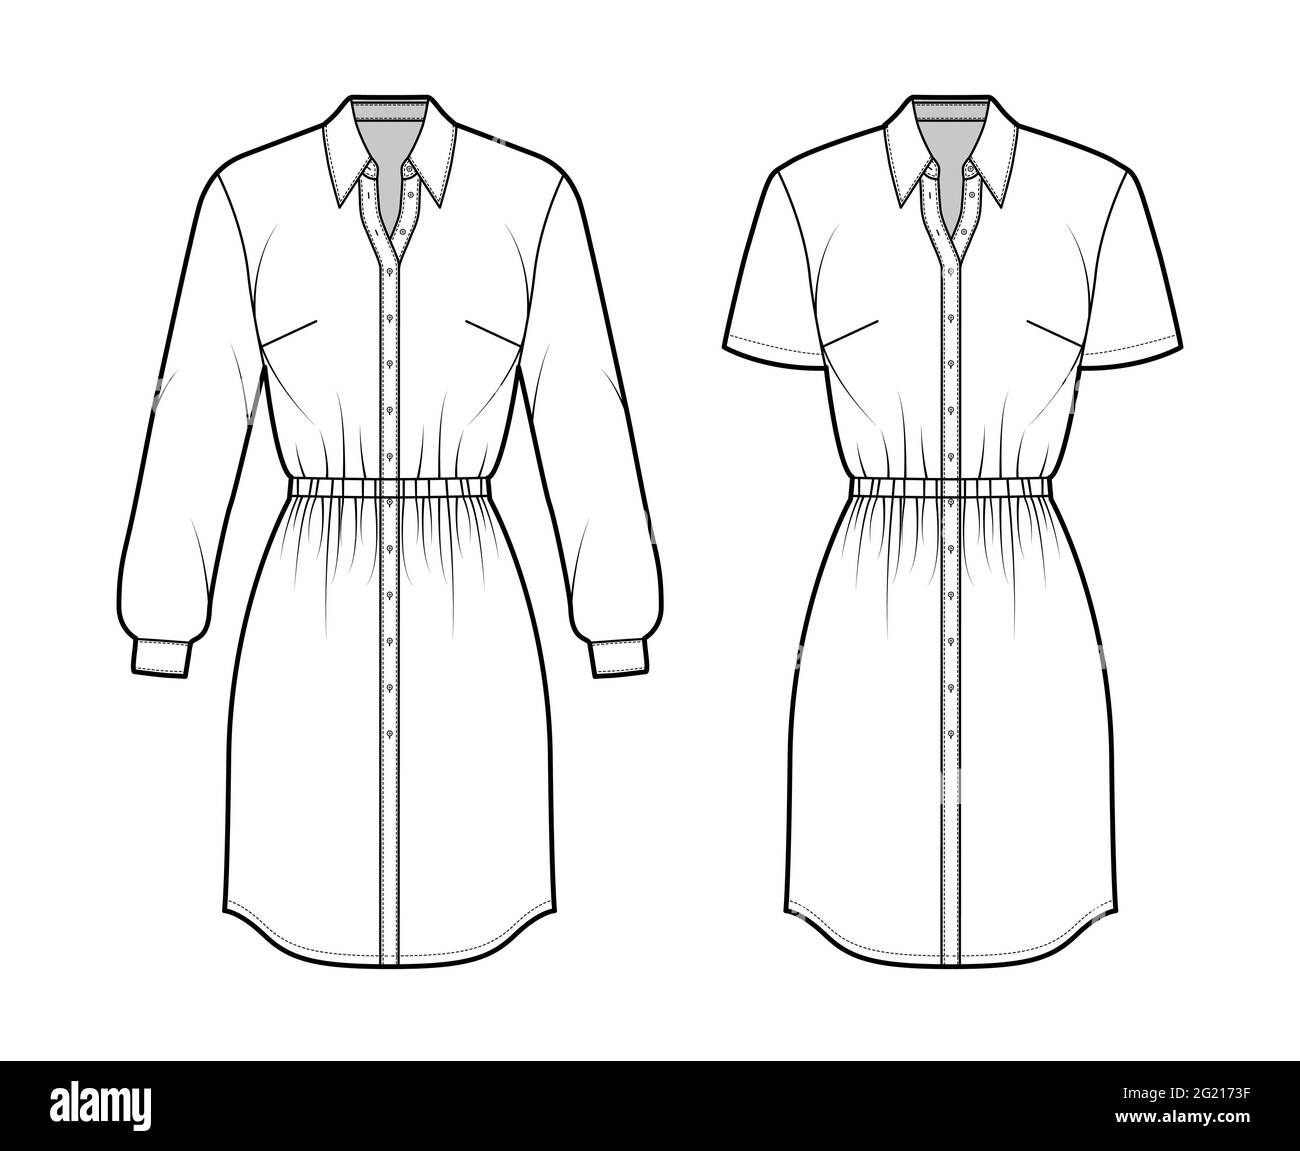 Set of Dresses shirt technical fashion illustration with gathered waist, long short sleeves, knee length skirt, classic collar, button closure. Flat apparel front, white color. Women, men CAD mockup Stock Vector